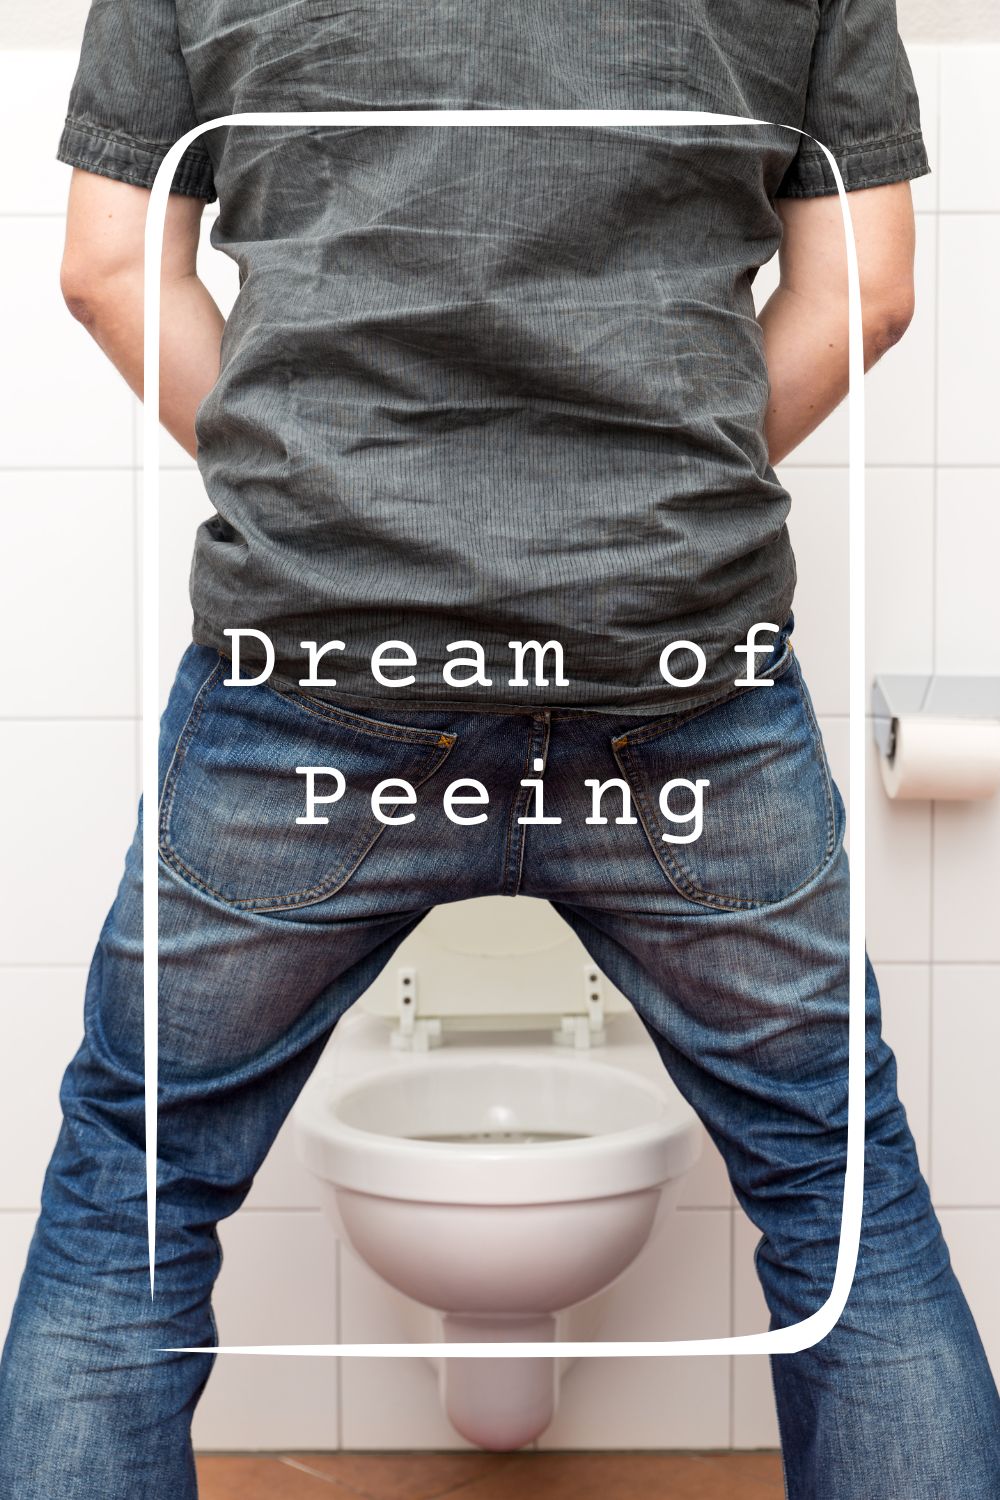 12 Dream of Peeing Meanings4